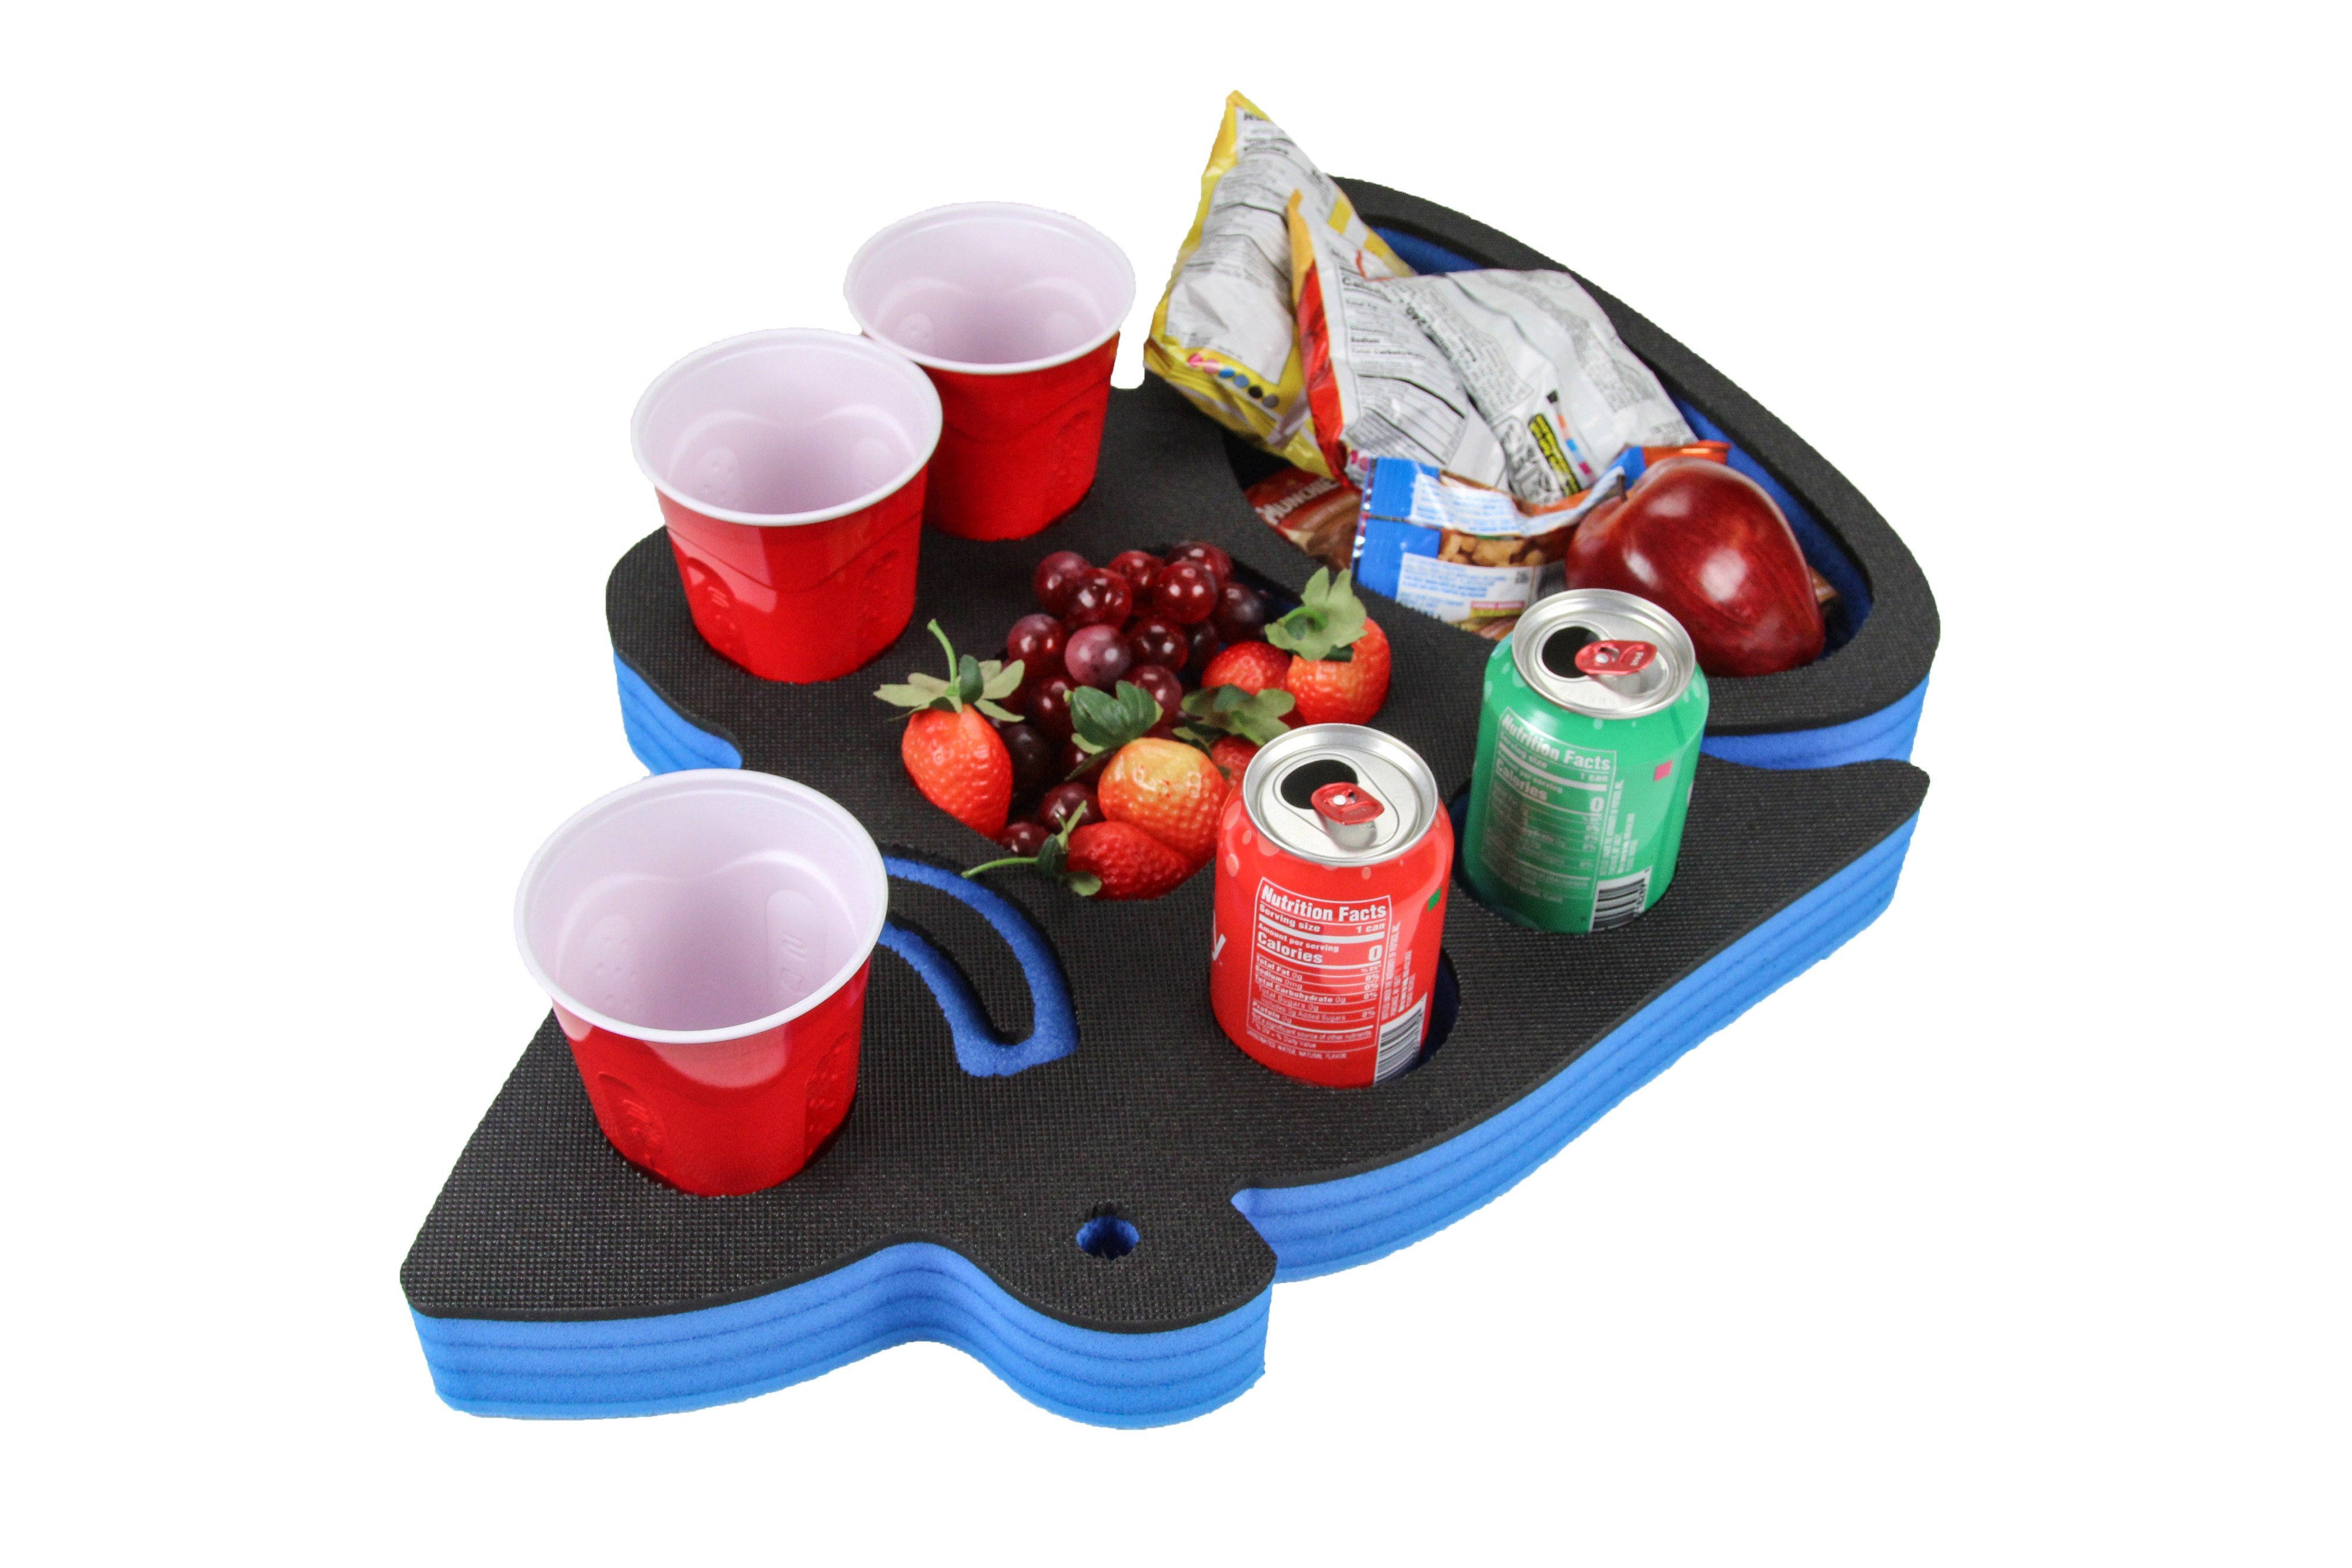 Betta Fighting Fish Shaped Drink Holder Table Tray for Pool or Beach Party Float Lounge Durable Foam 7 Compartment UV Resistant Cup Holders 2 Feet